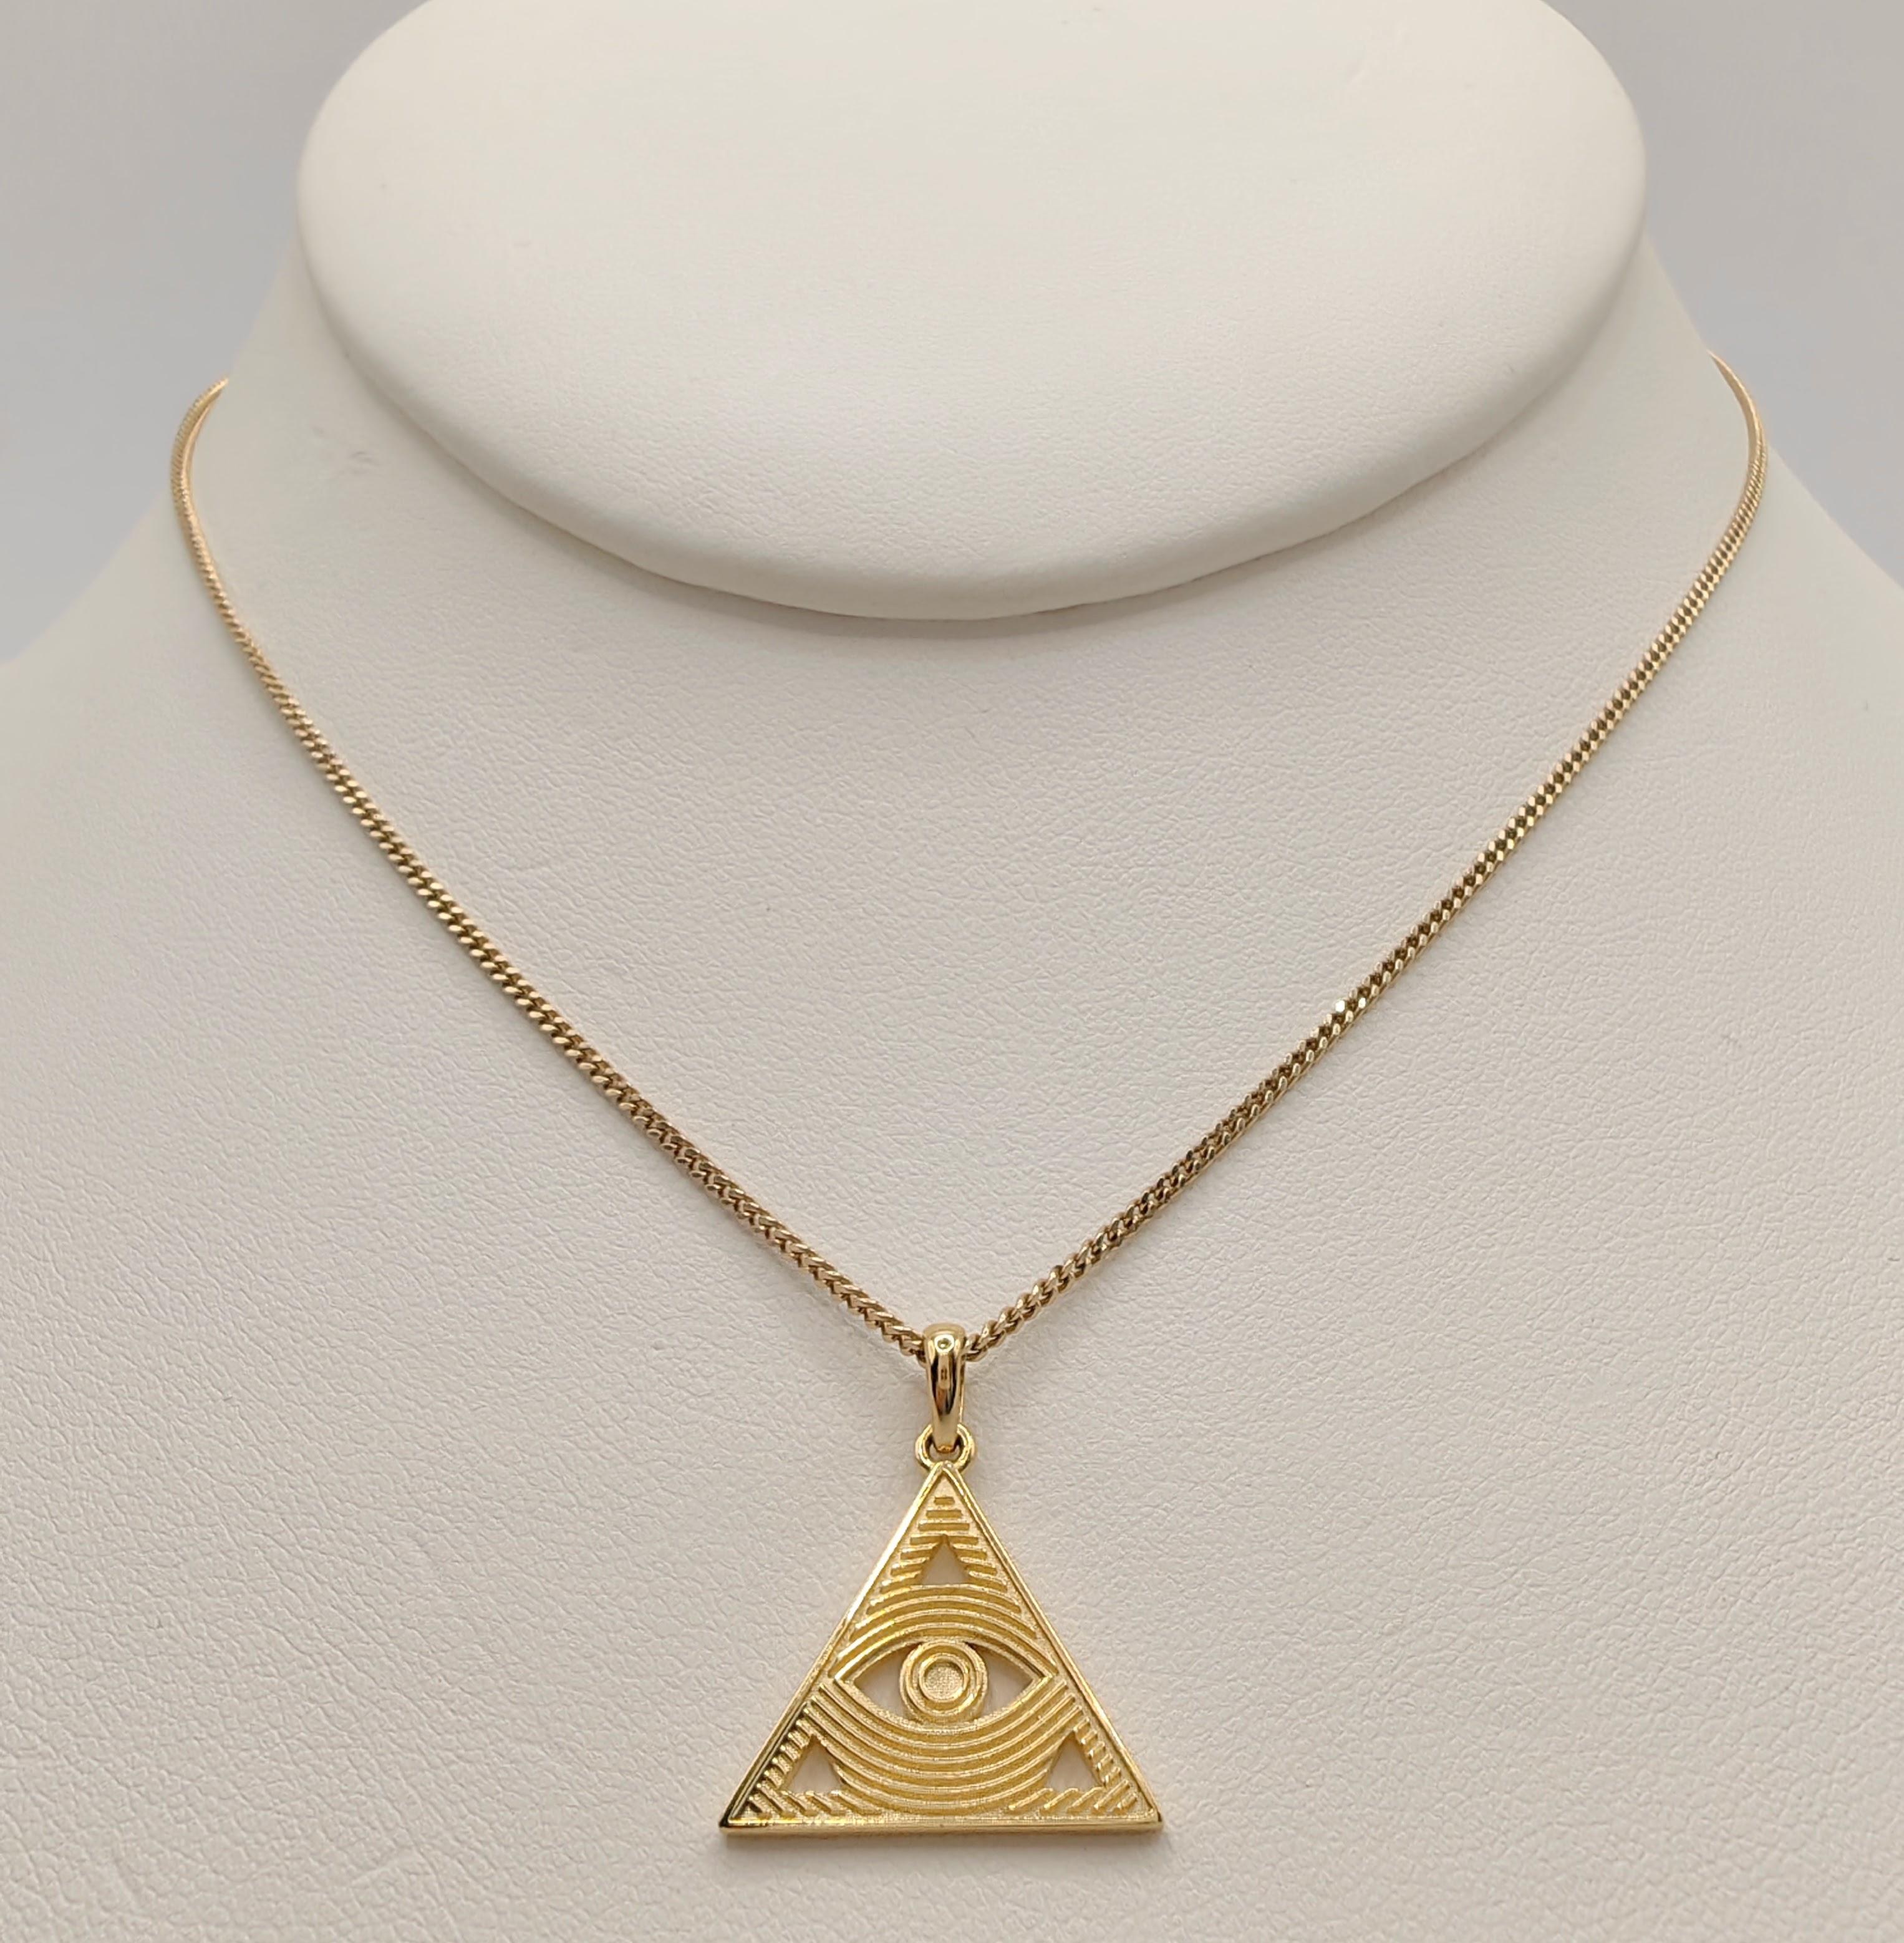 Women's or Men's Evil Eye Redefined: Modern Triangle Talisman Necklace Pendant in 18K Yellow Gold For Sale